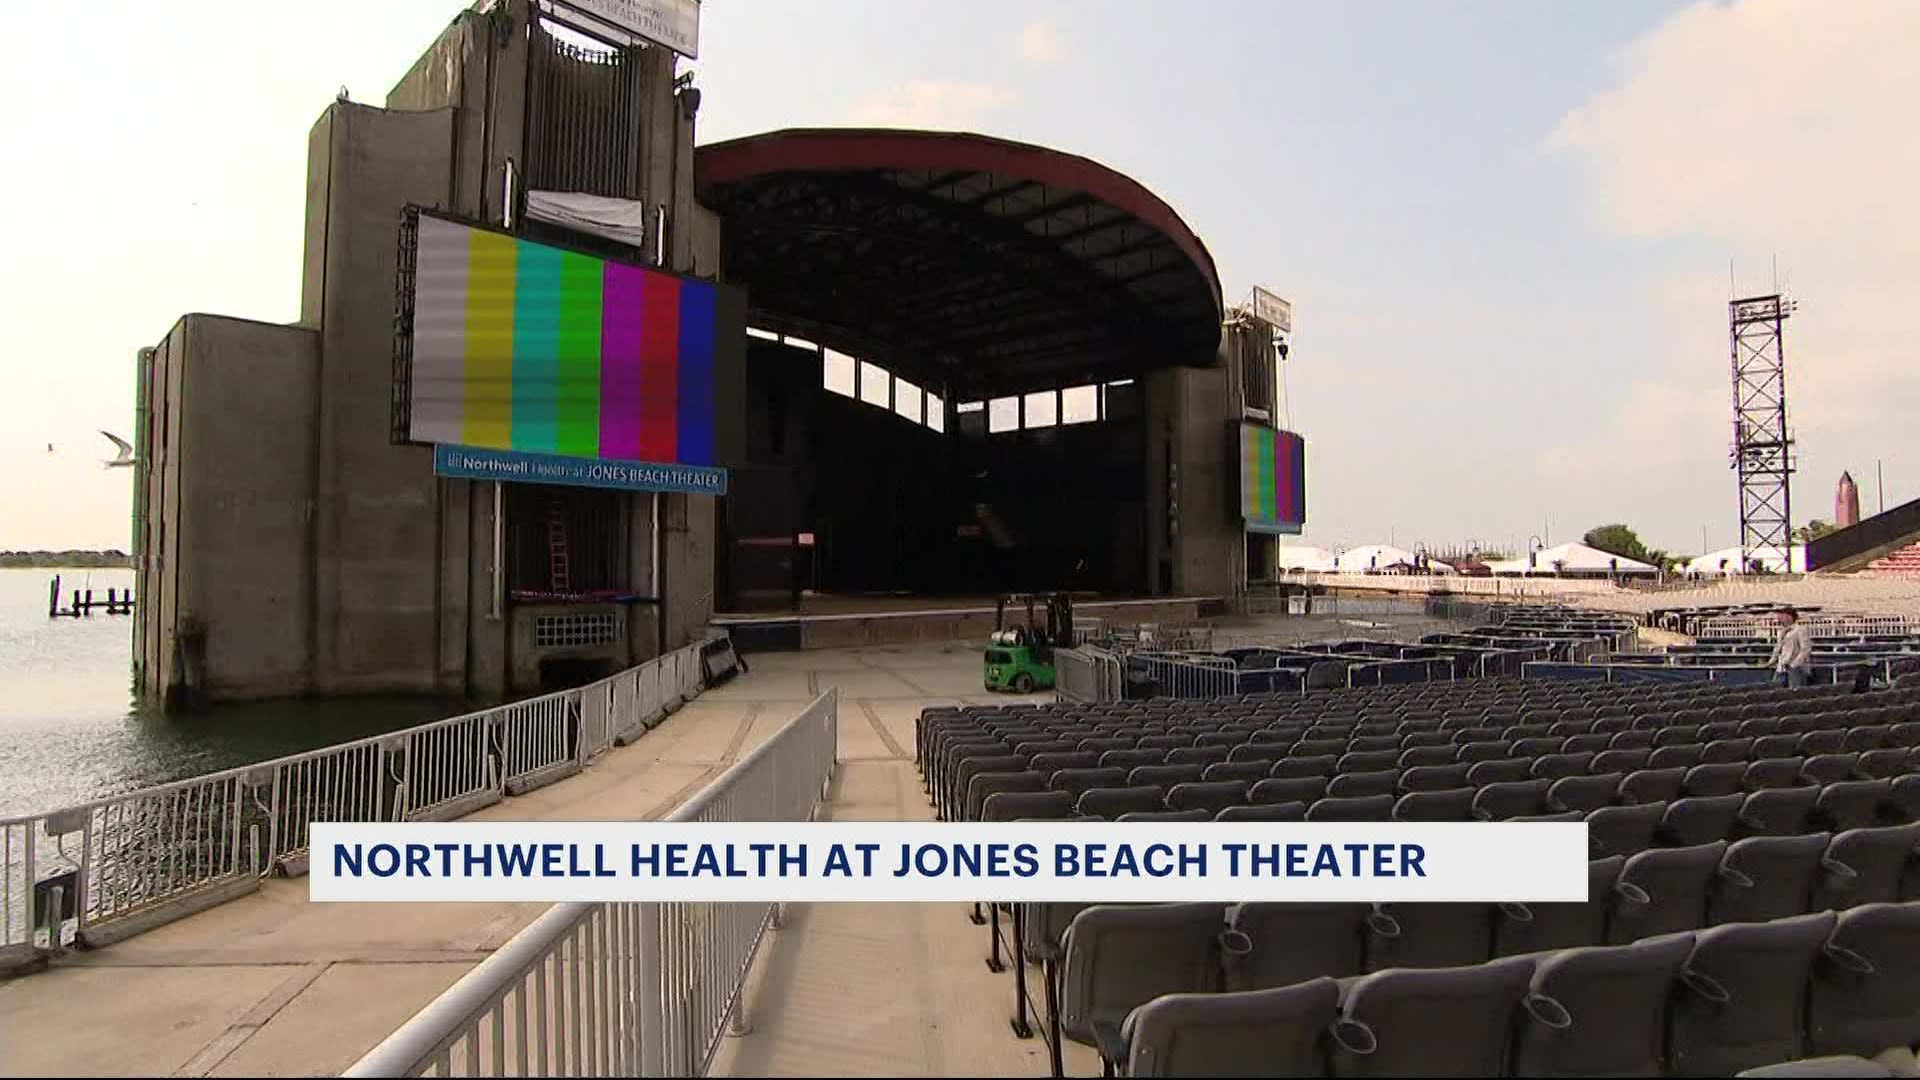 Concerts are back at Jones Beach Theater. Here's what you need to know.